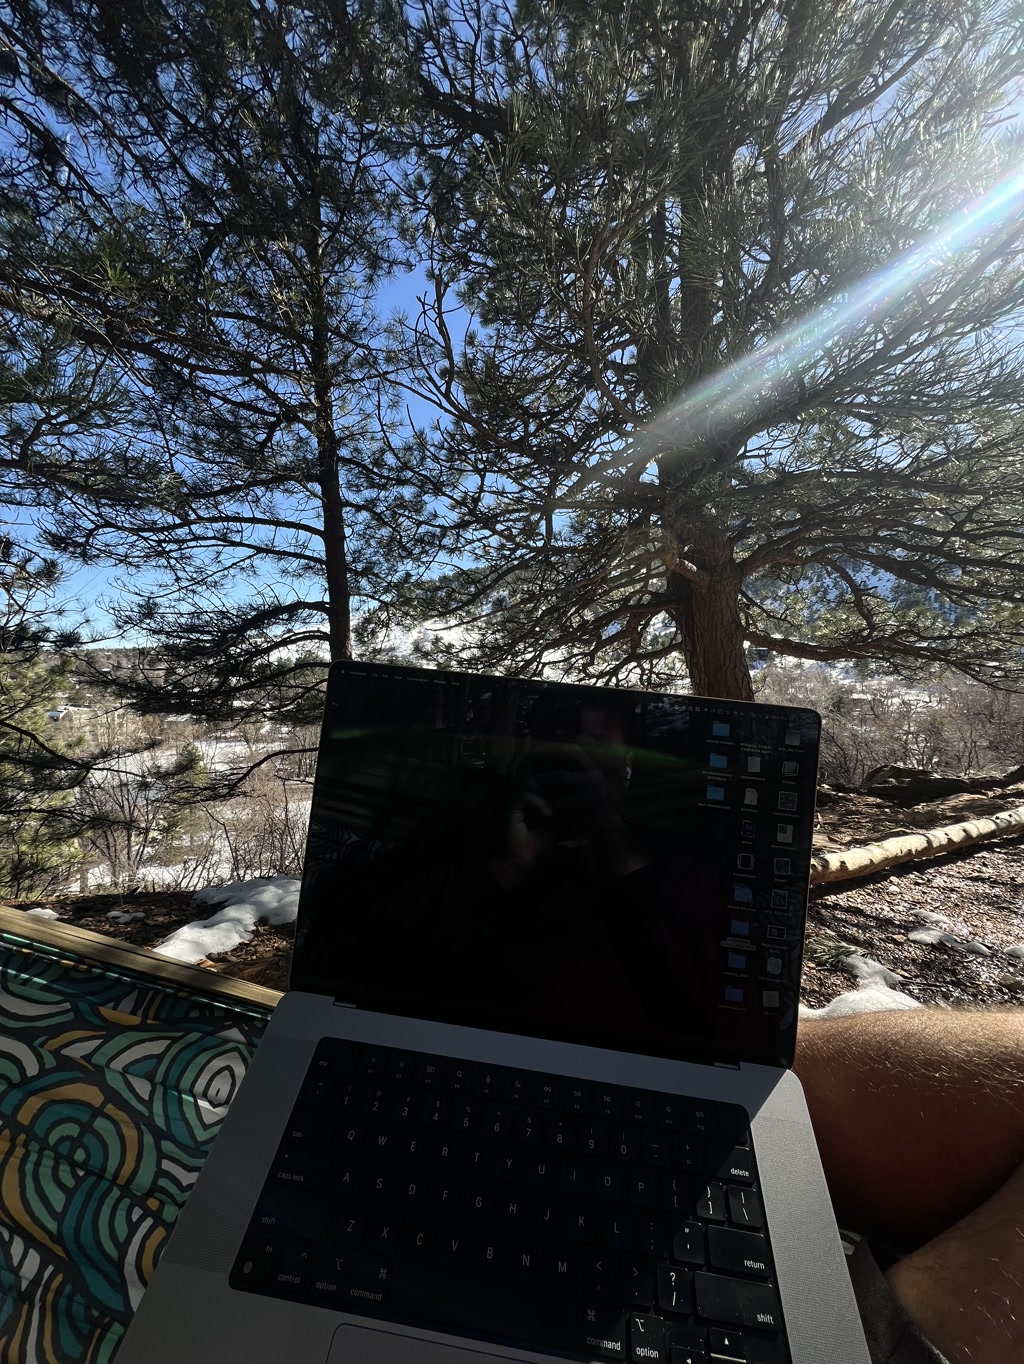 An outdoor work setup captures a laptop opened on a lapdesk, which rests on patterned cushions. The surroundings are tranquil with evergreen trees and a glimpse of a snow-covered terrain in the background. Sunlight filters through the trees, creating a lens flare effect. The laptop screen is off, reflecting the figure of the person using it and the natural environment beyond the screen.